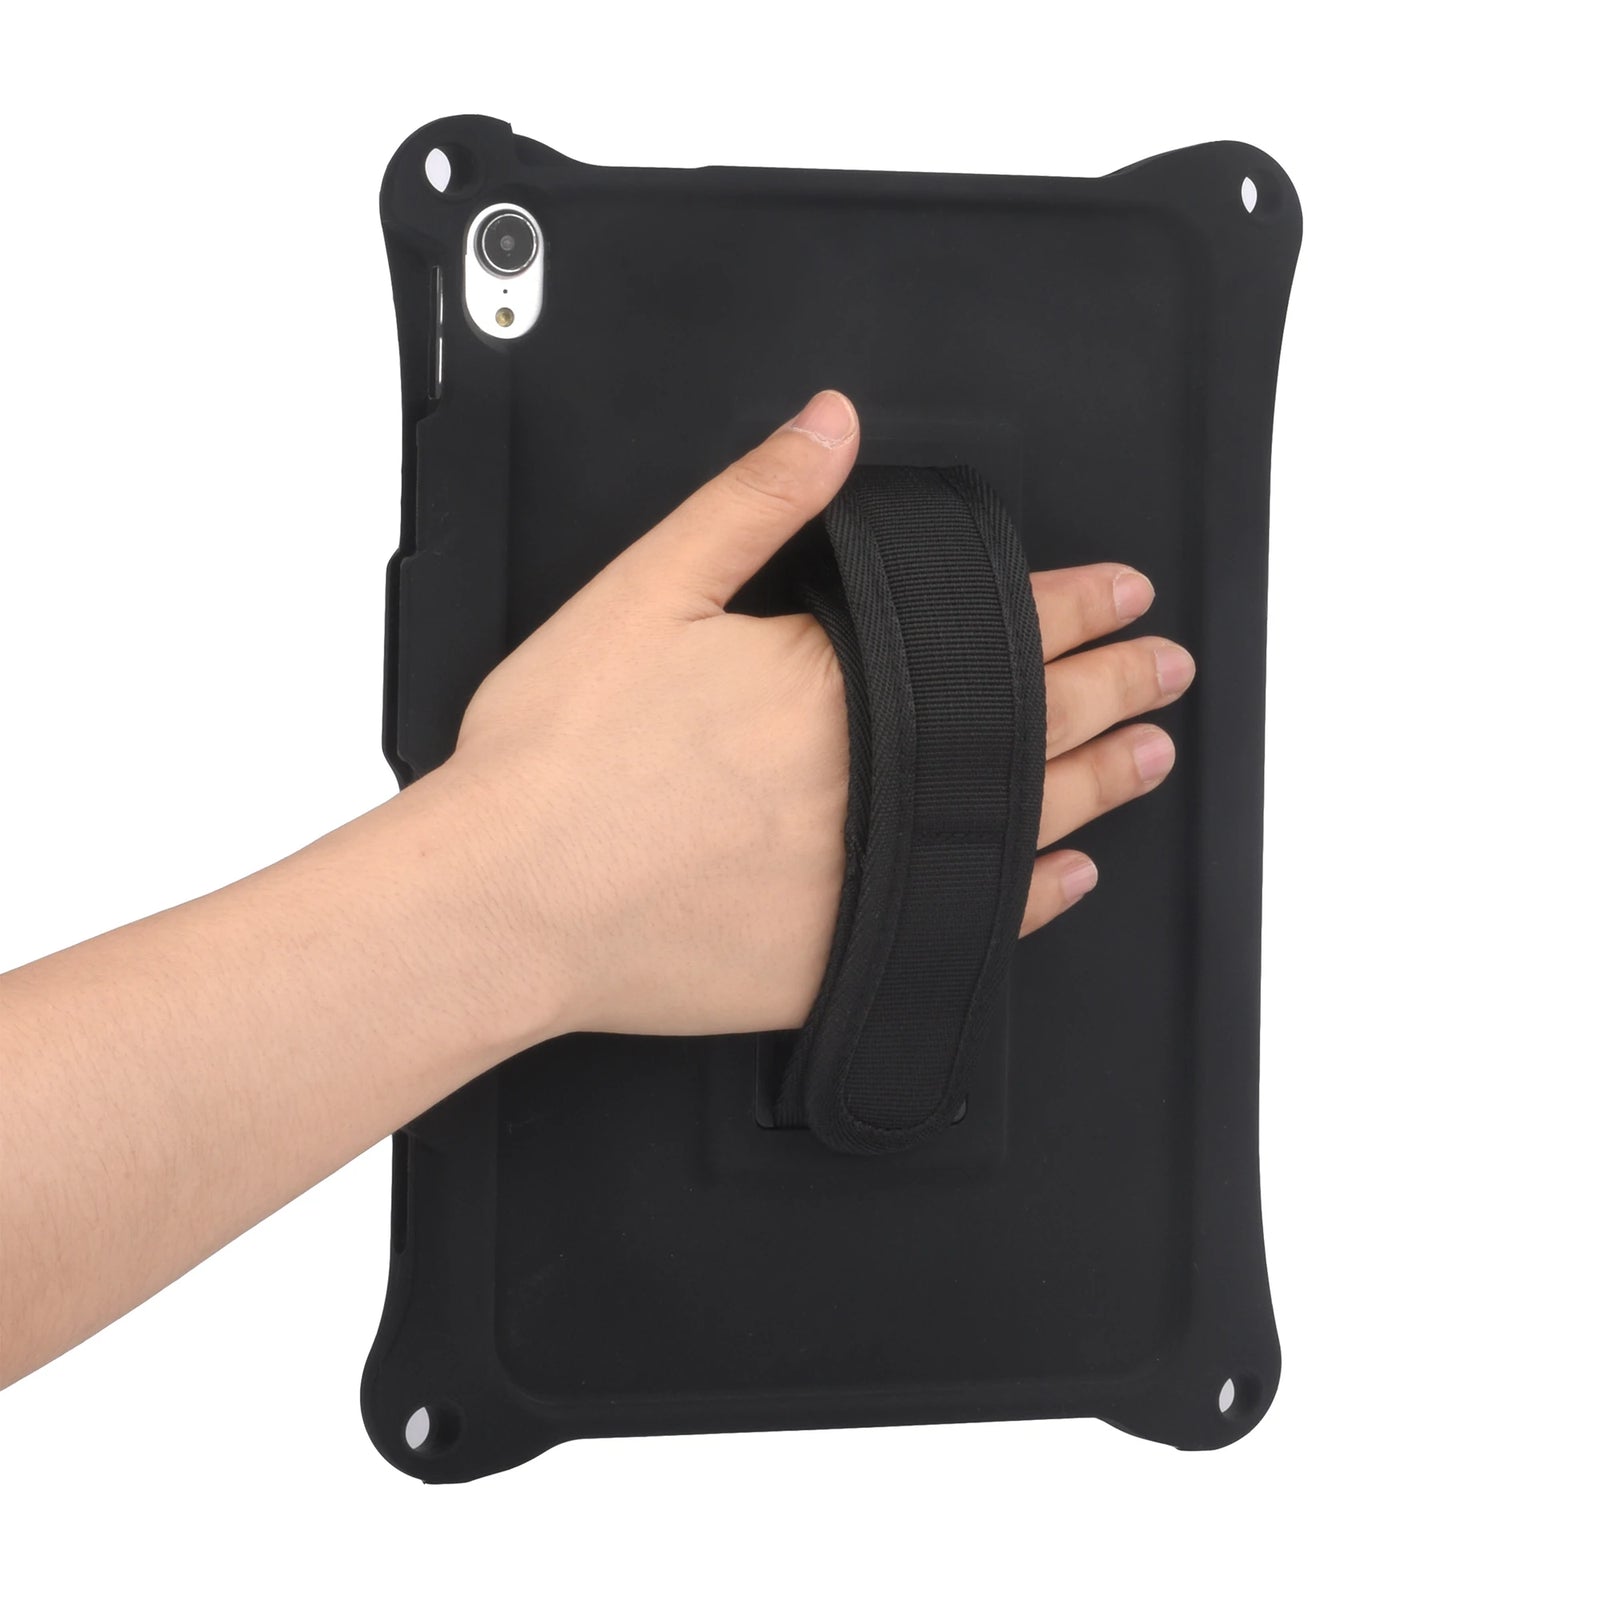 Cooper Bounce Strap Rugged case with Strap & Kickstand for iPad Pro 11 -  Cooper Cases